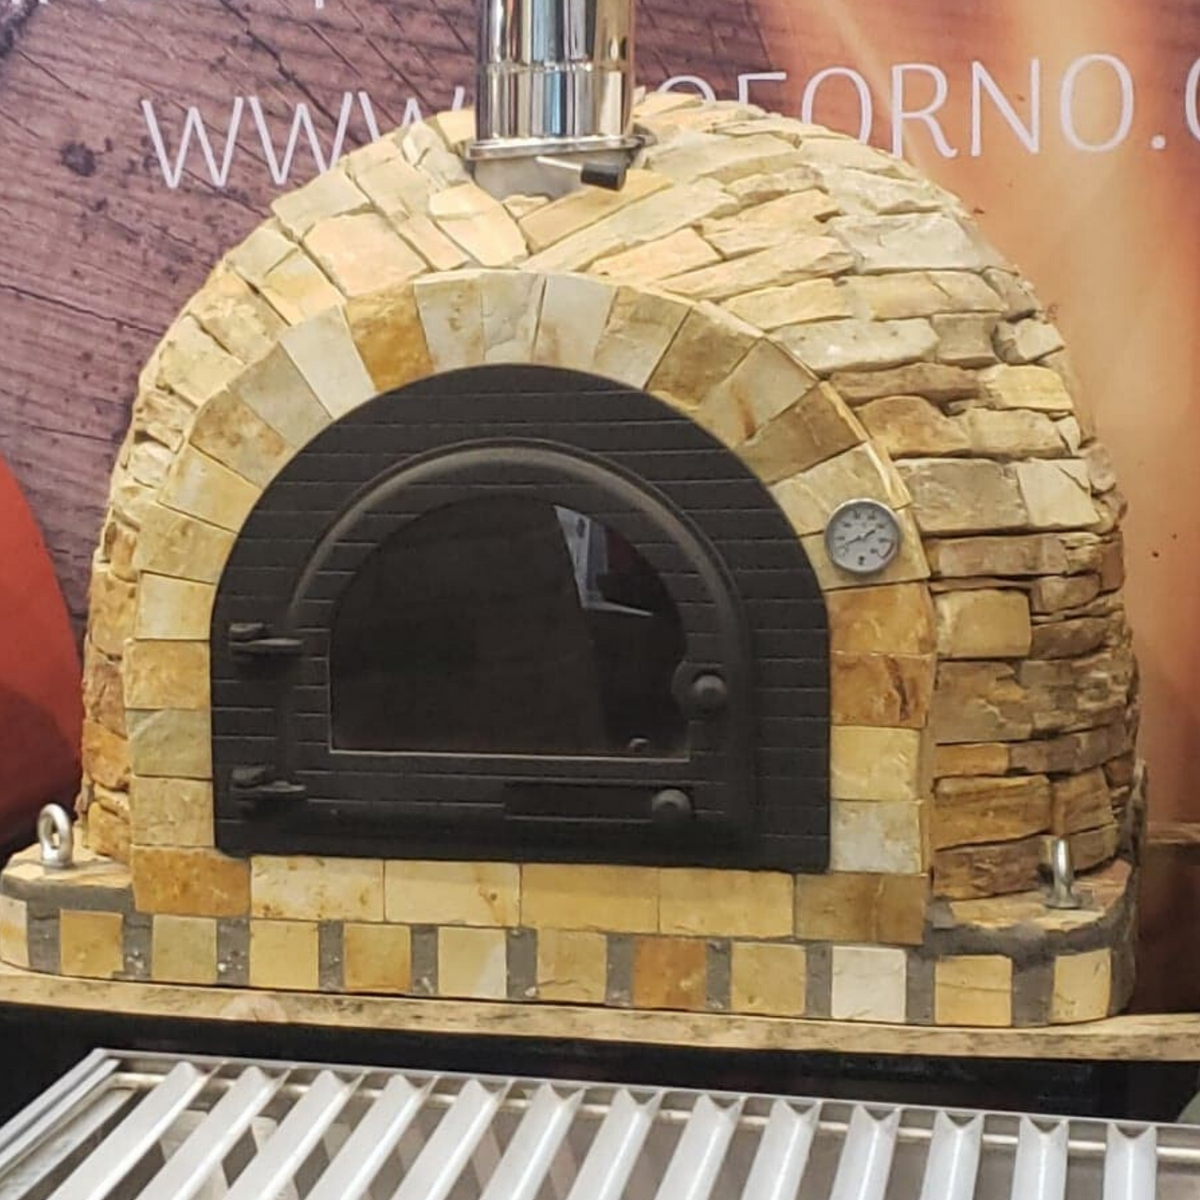 Authentic Pizza Ovens Traditional Brick famosi Wood Fire Pizza Oven